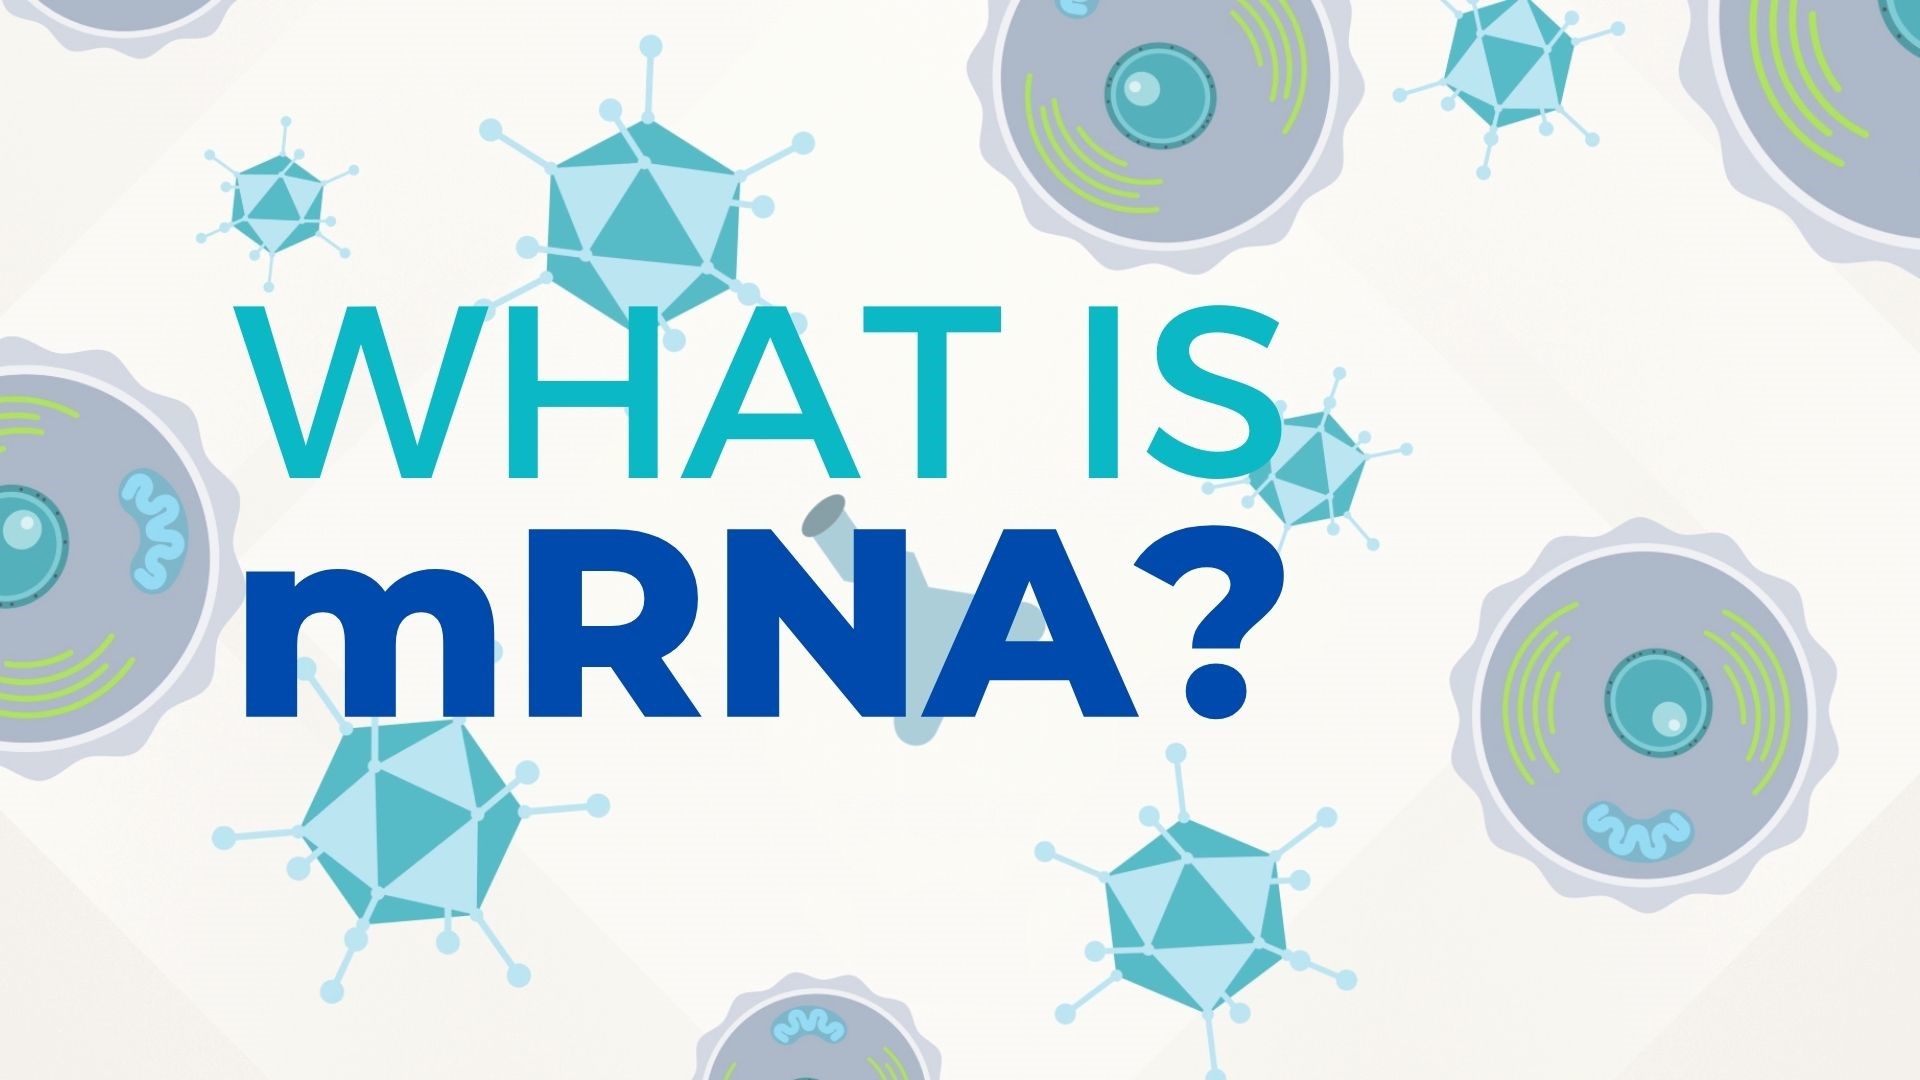 Both Pfizer and Moderna developed their COVID vaccines using mRNA technology, but what does that mean? Pat Dooris explains why mRNA vaccines are so groundbreaking.